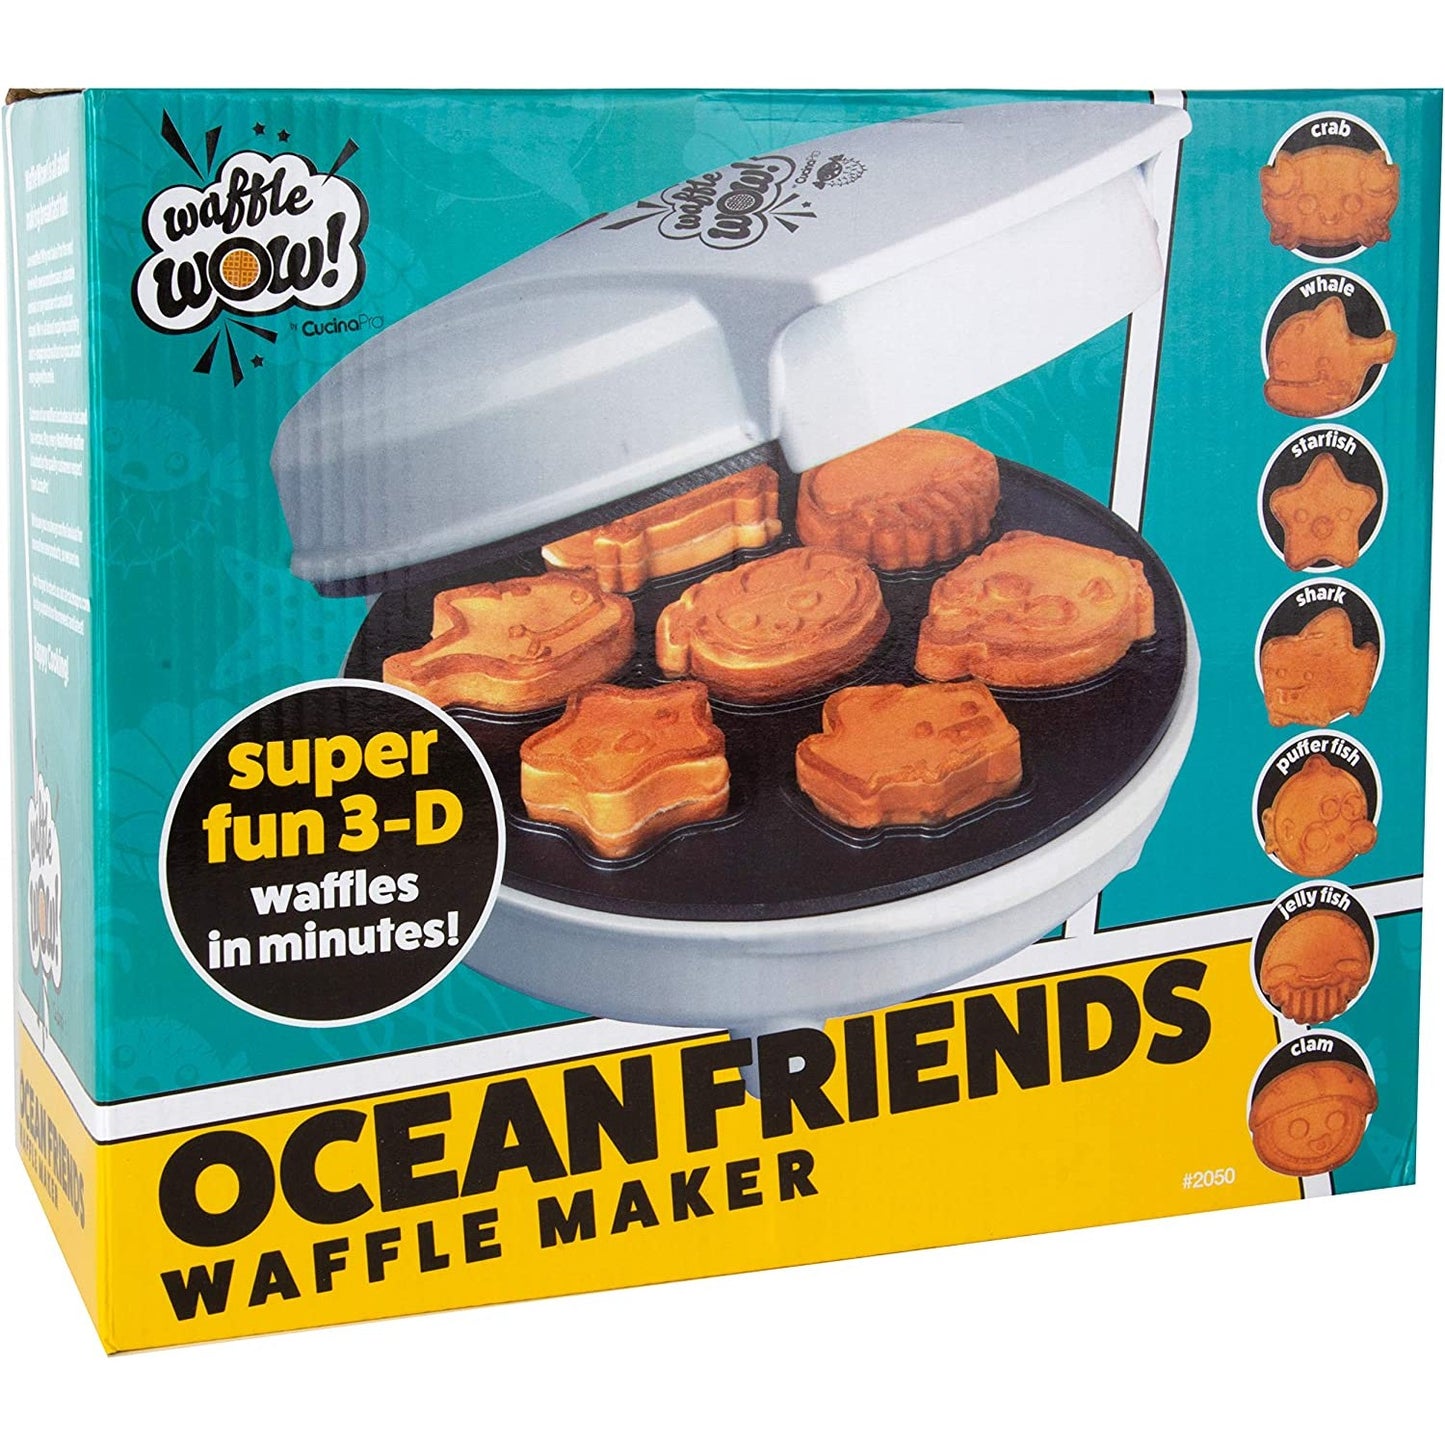 A box and packaging for a sea creature waffle maker. There is text which says, "Super fun 3D waffles in minutes. Ocean friends waffle maker."